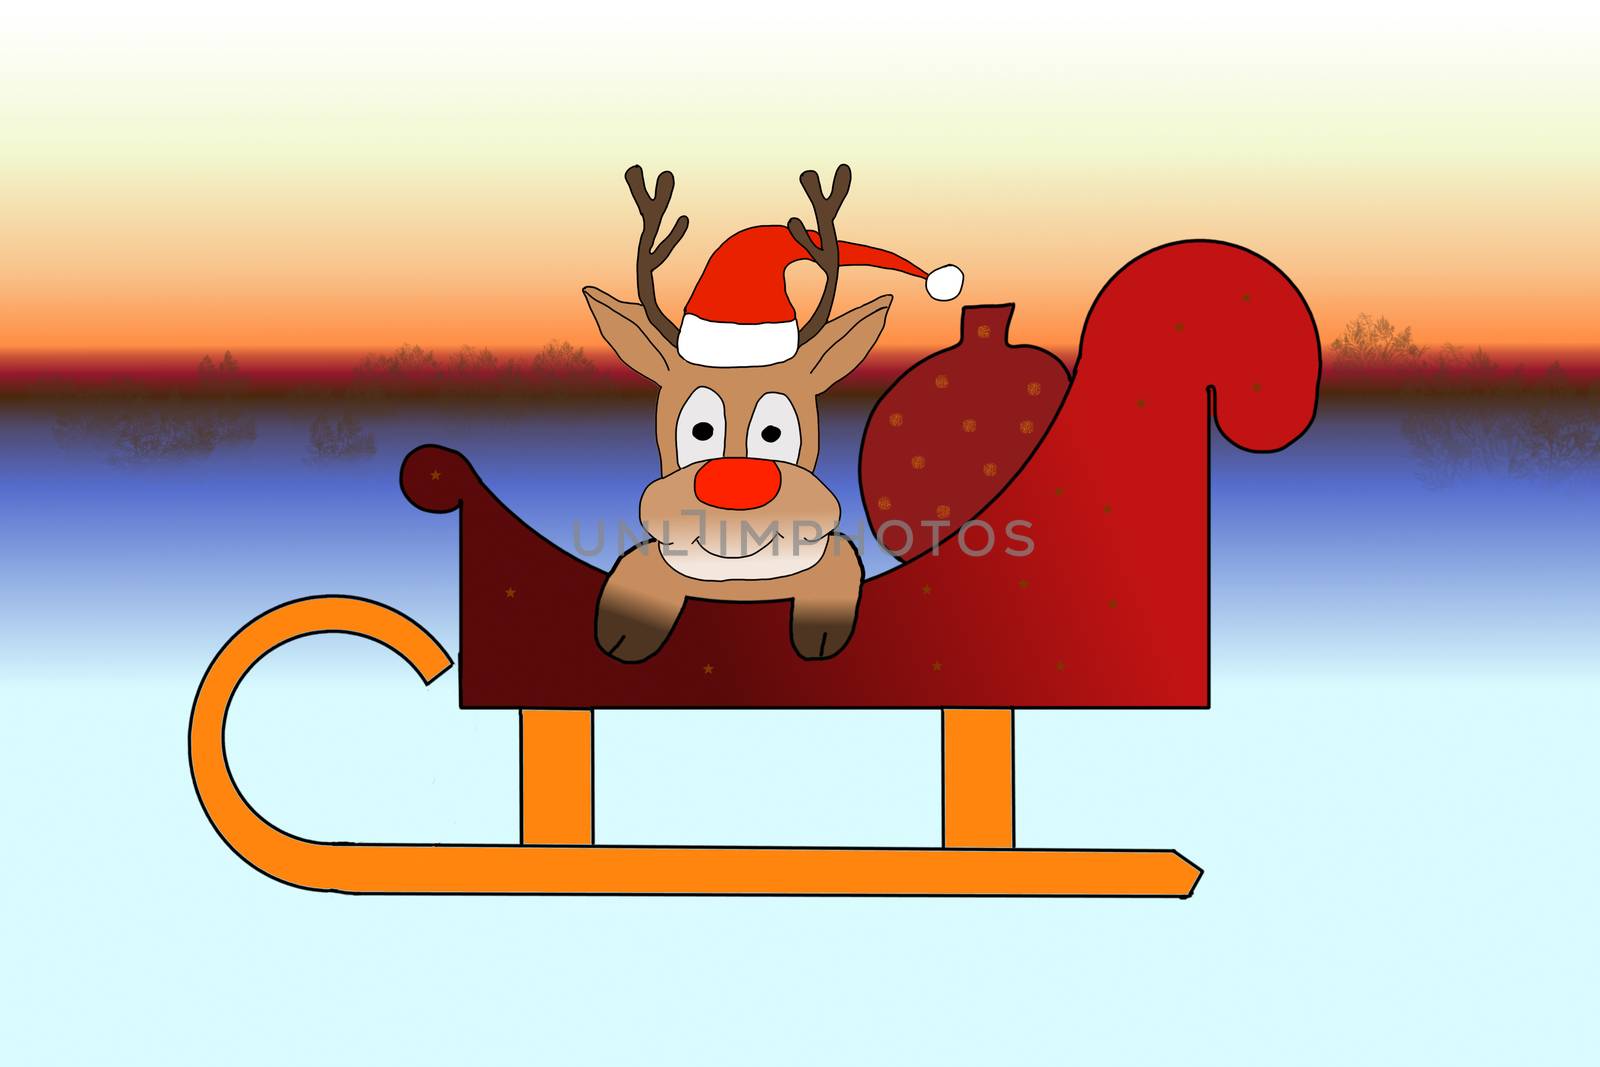 Rudolph sitting in Santas sleigh by gwolters